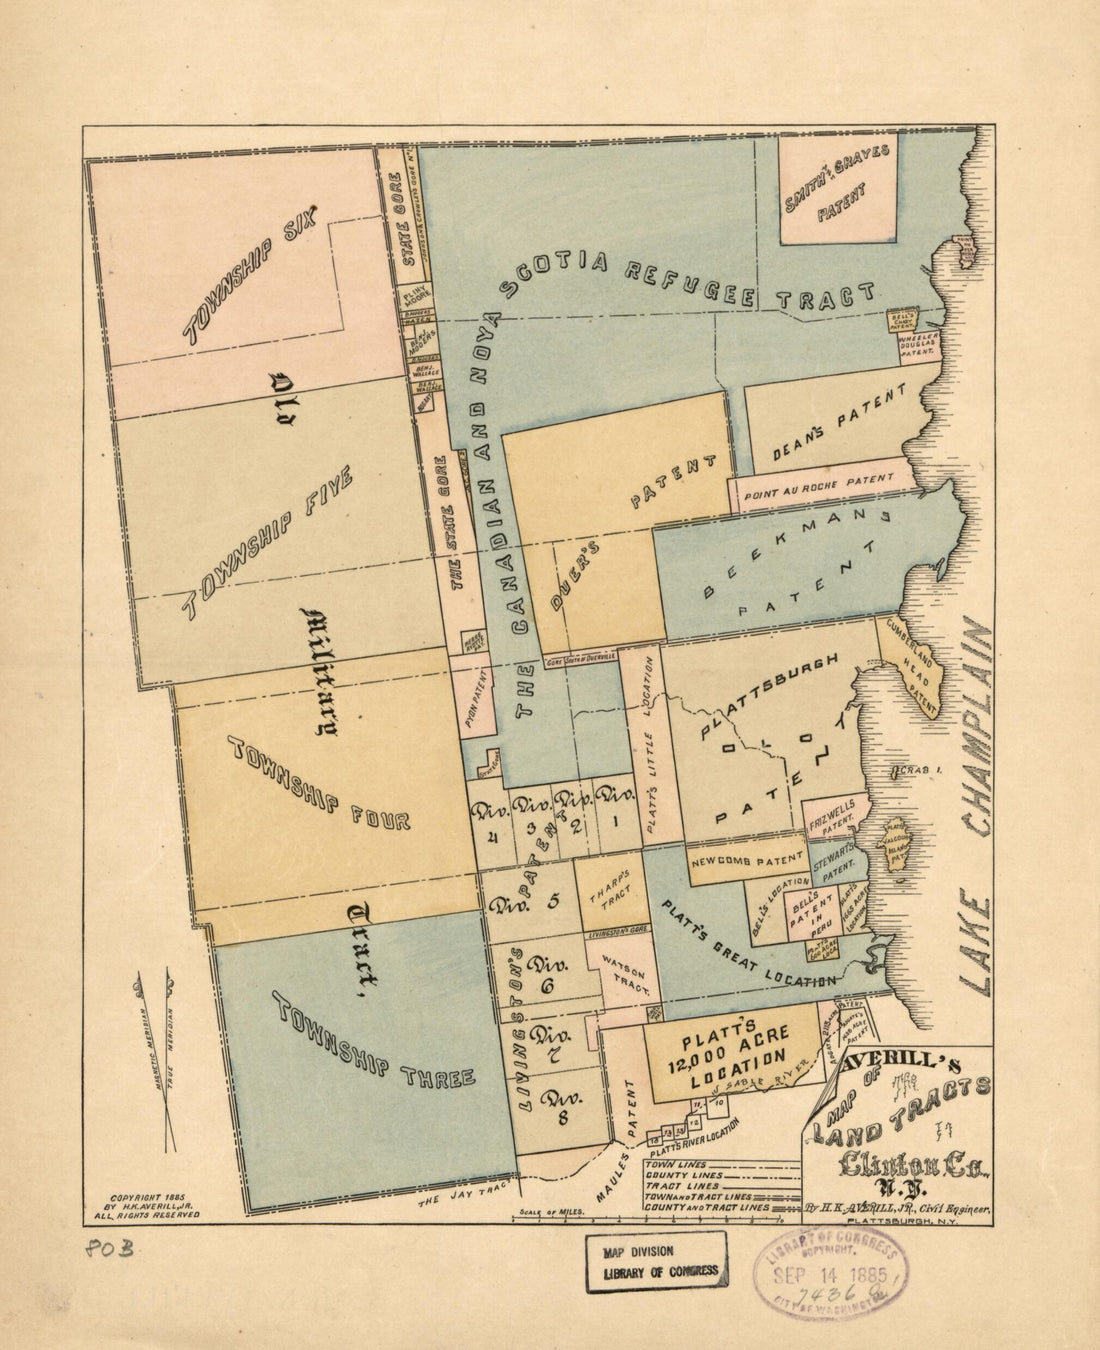 This old map of Averill&